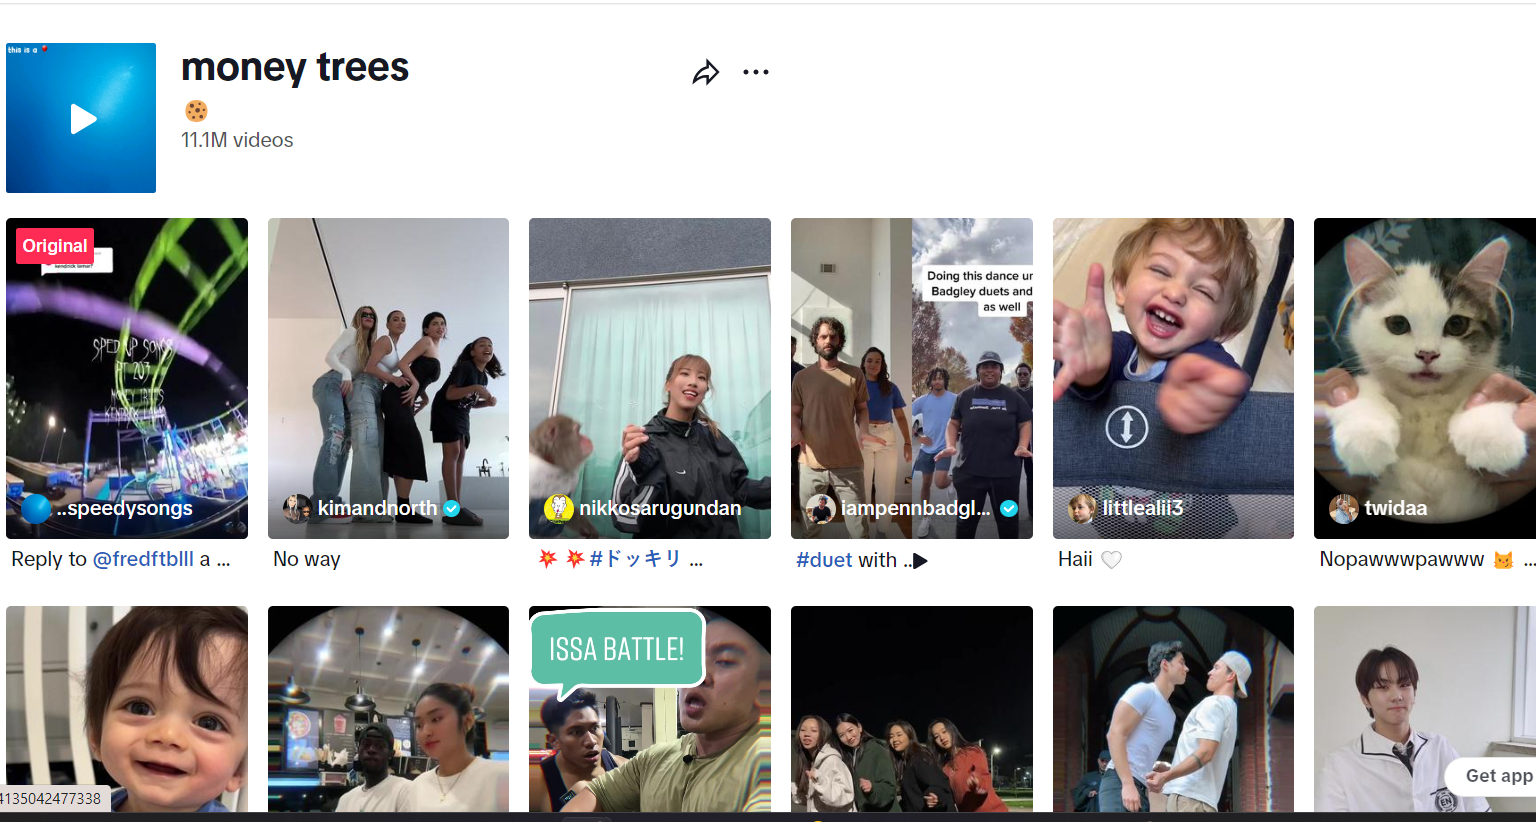 A screenshot of the social media profile of 'money trees' showcasing a series of thumbnails and 11.1M videos